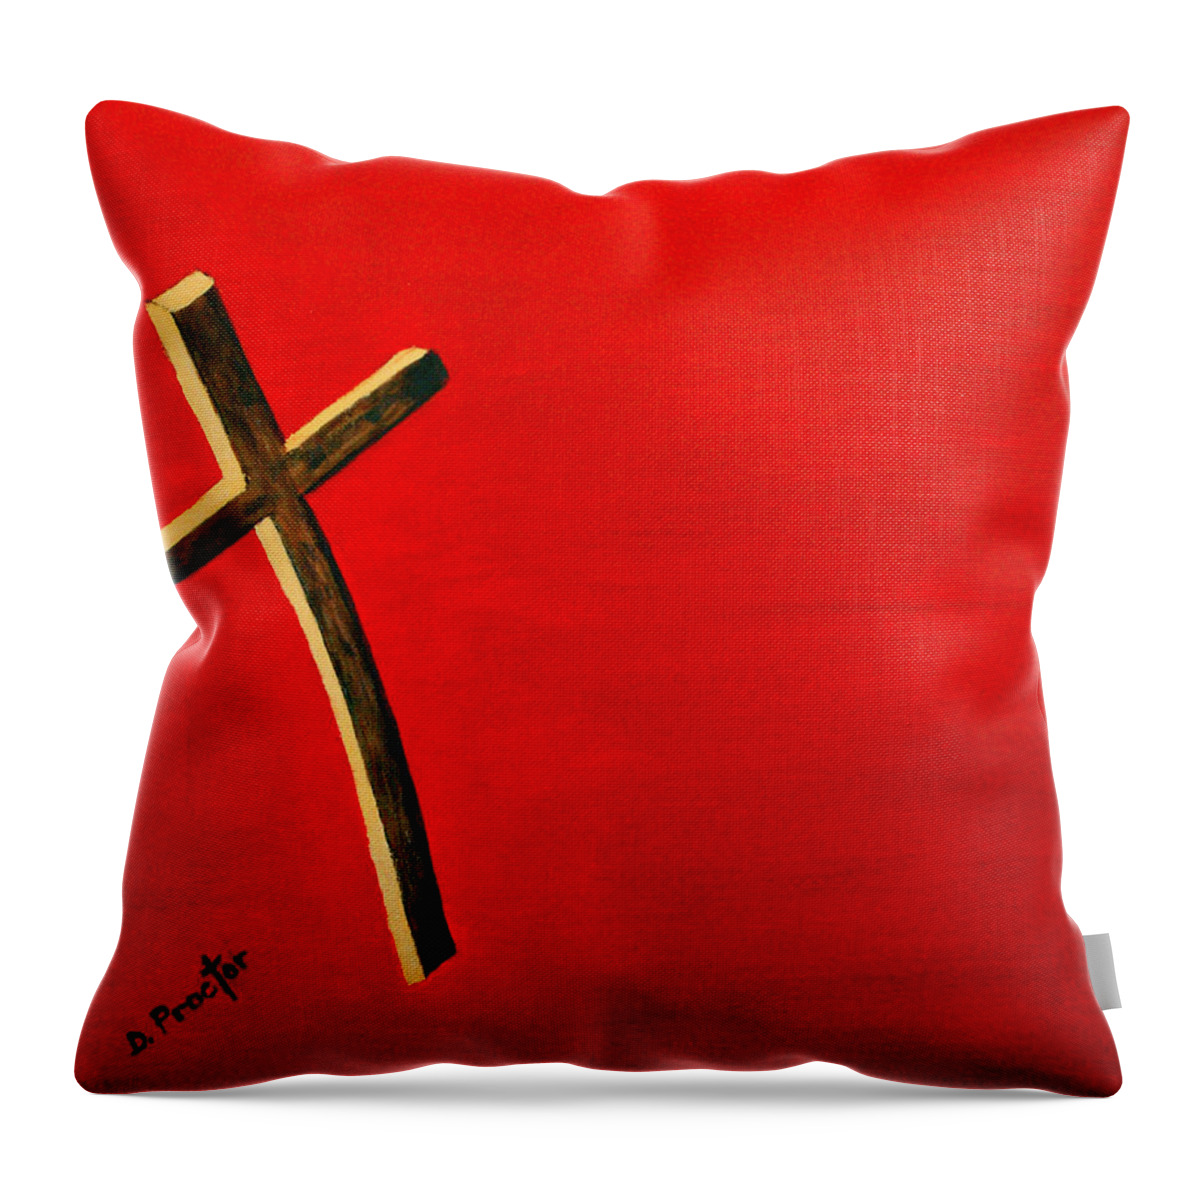 Cross Throw Pillow featuring the painting Crossing Over by Donna Proctor